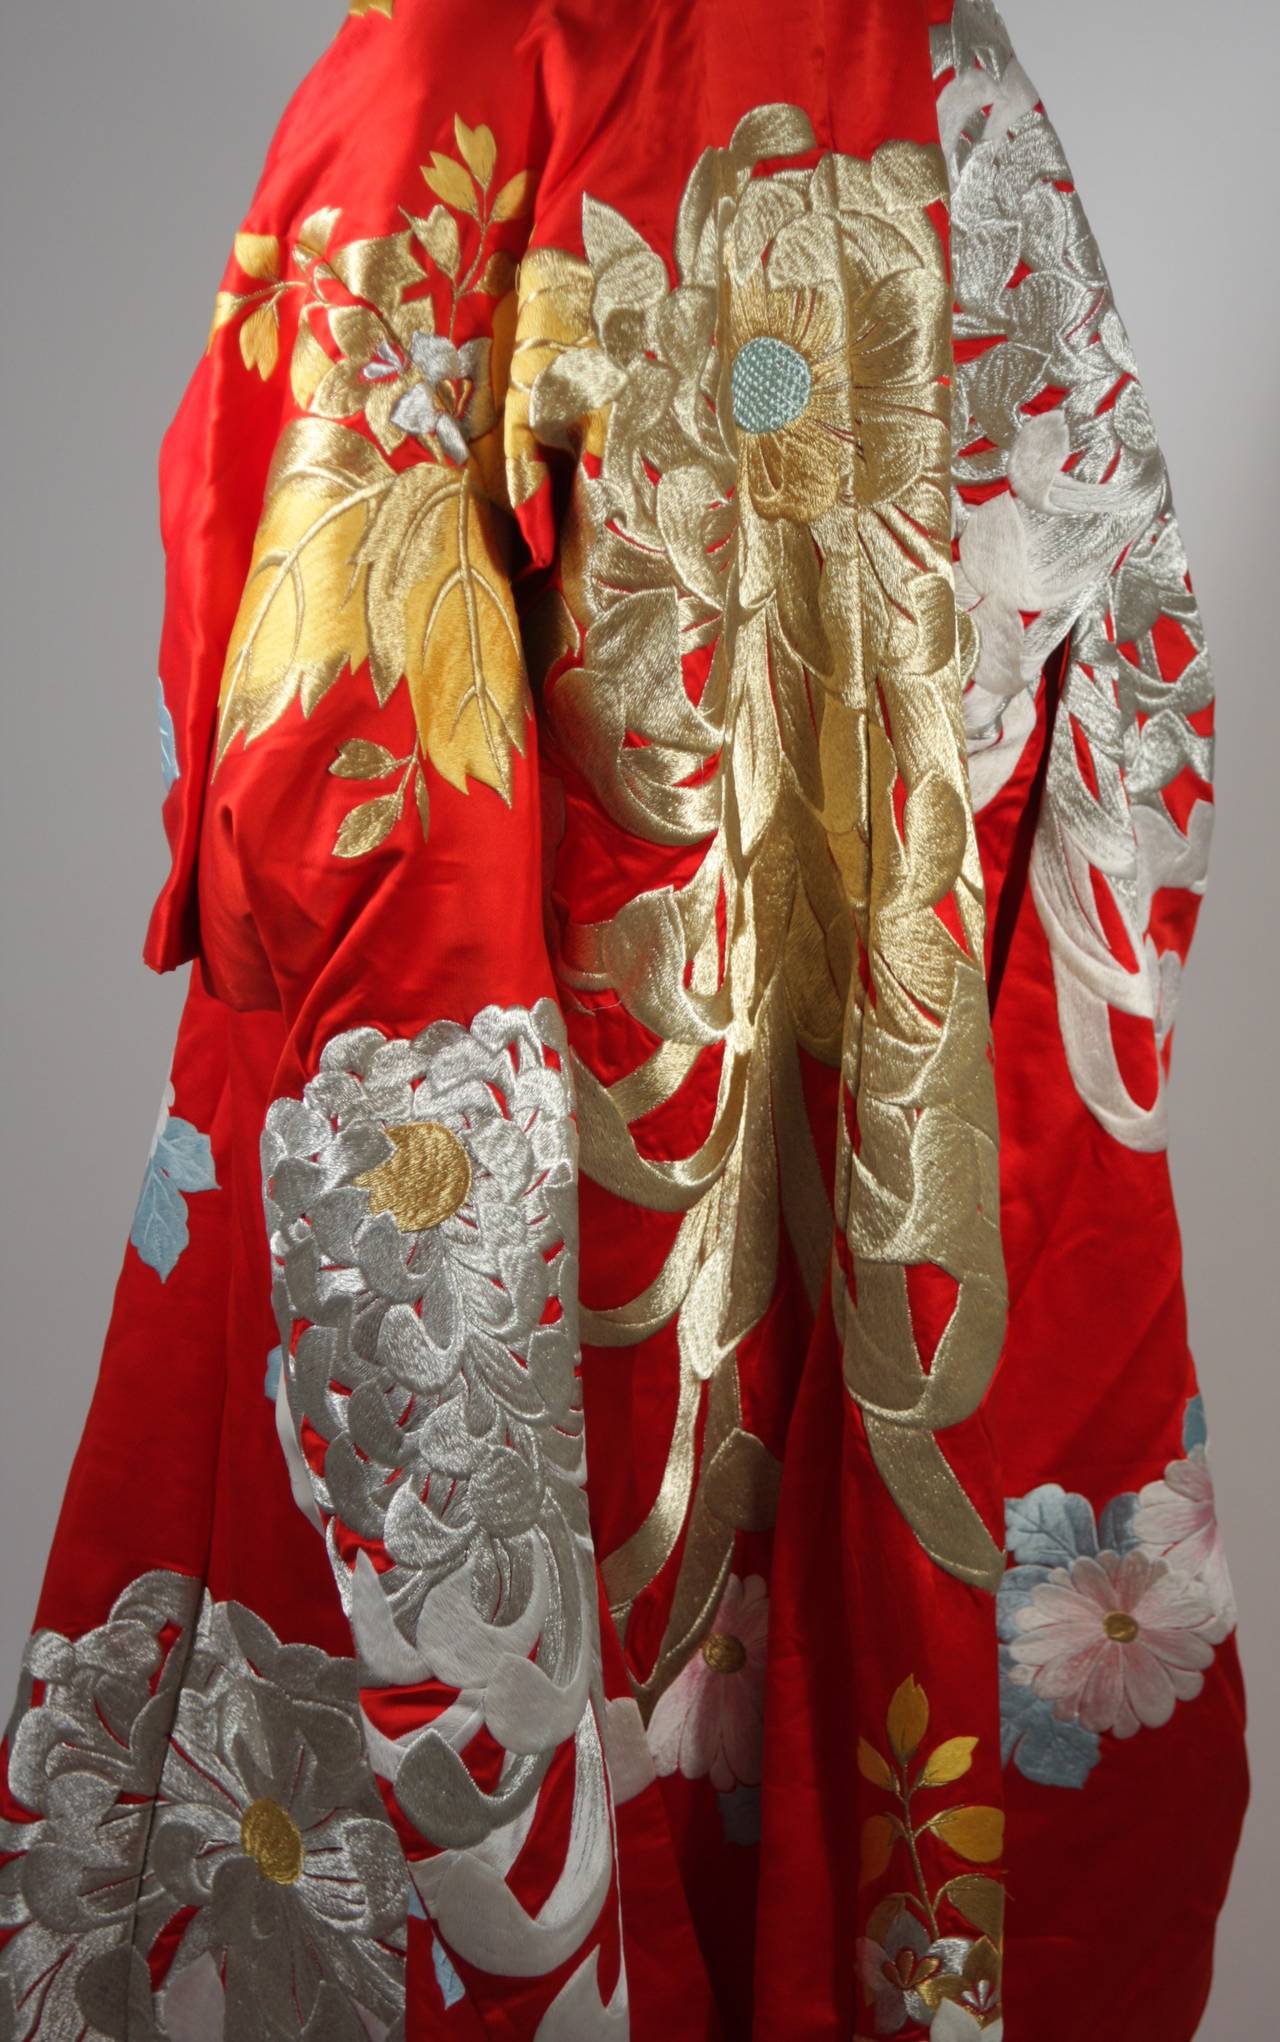 Rare Museum Quality Red Silk Embroidered Kimono w. Ivory and Gold ...